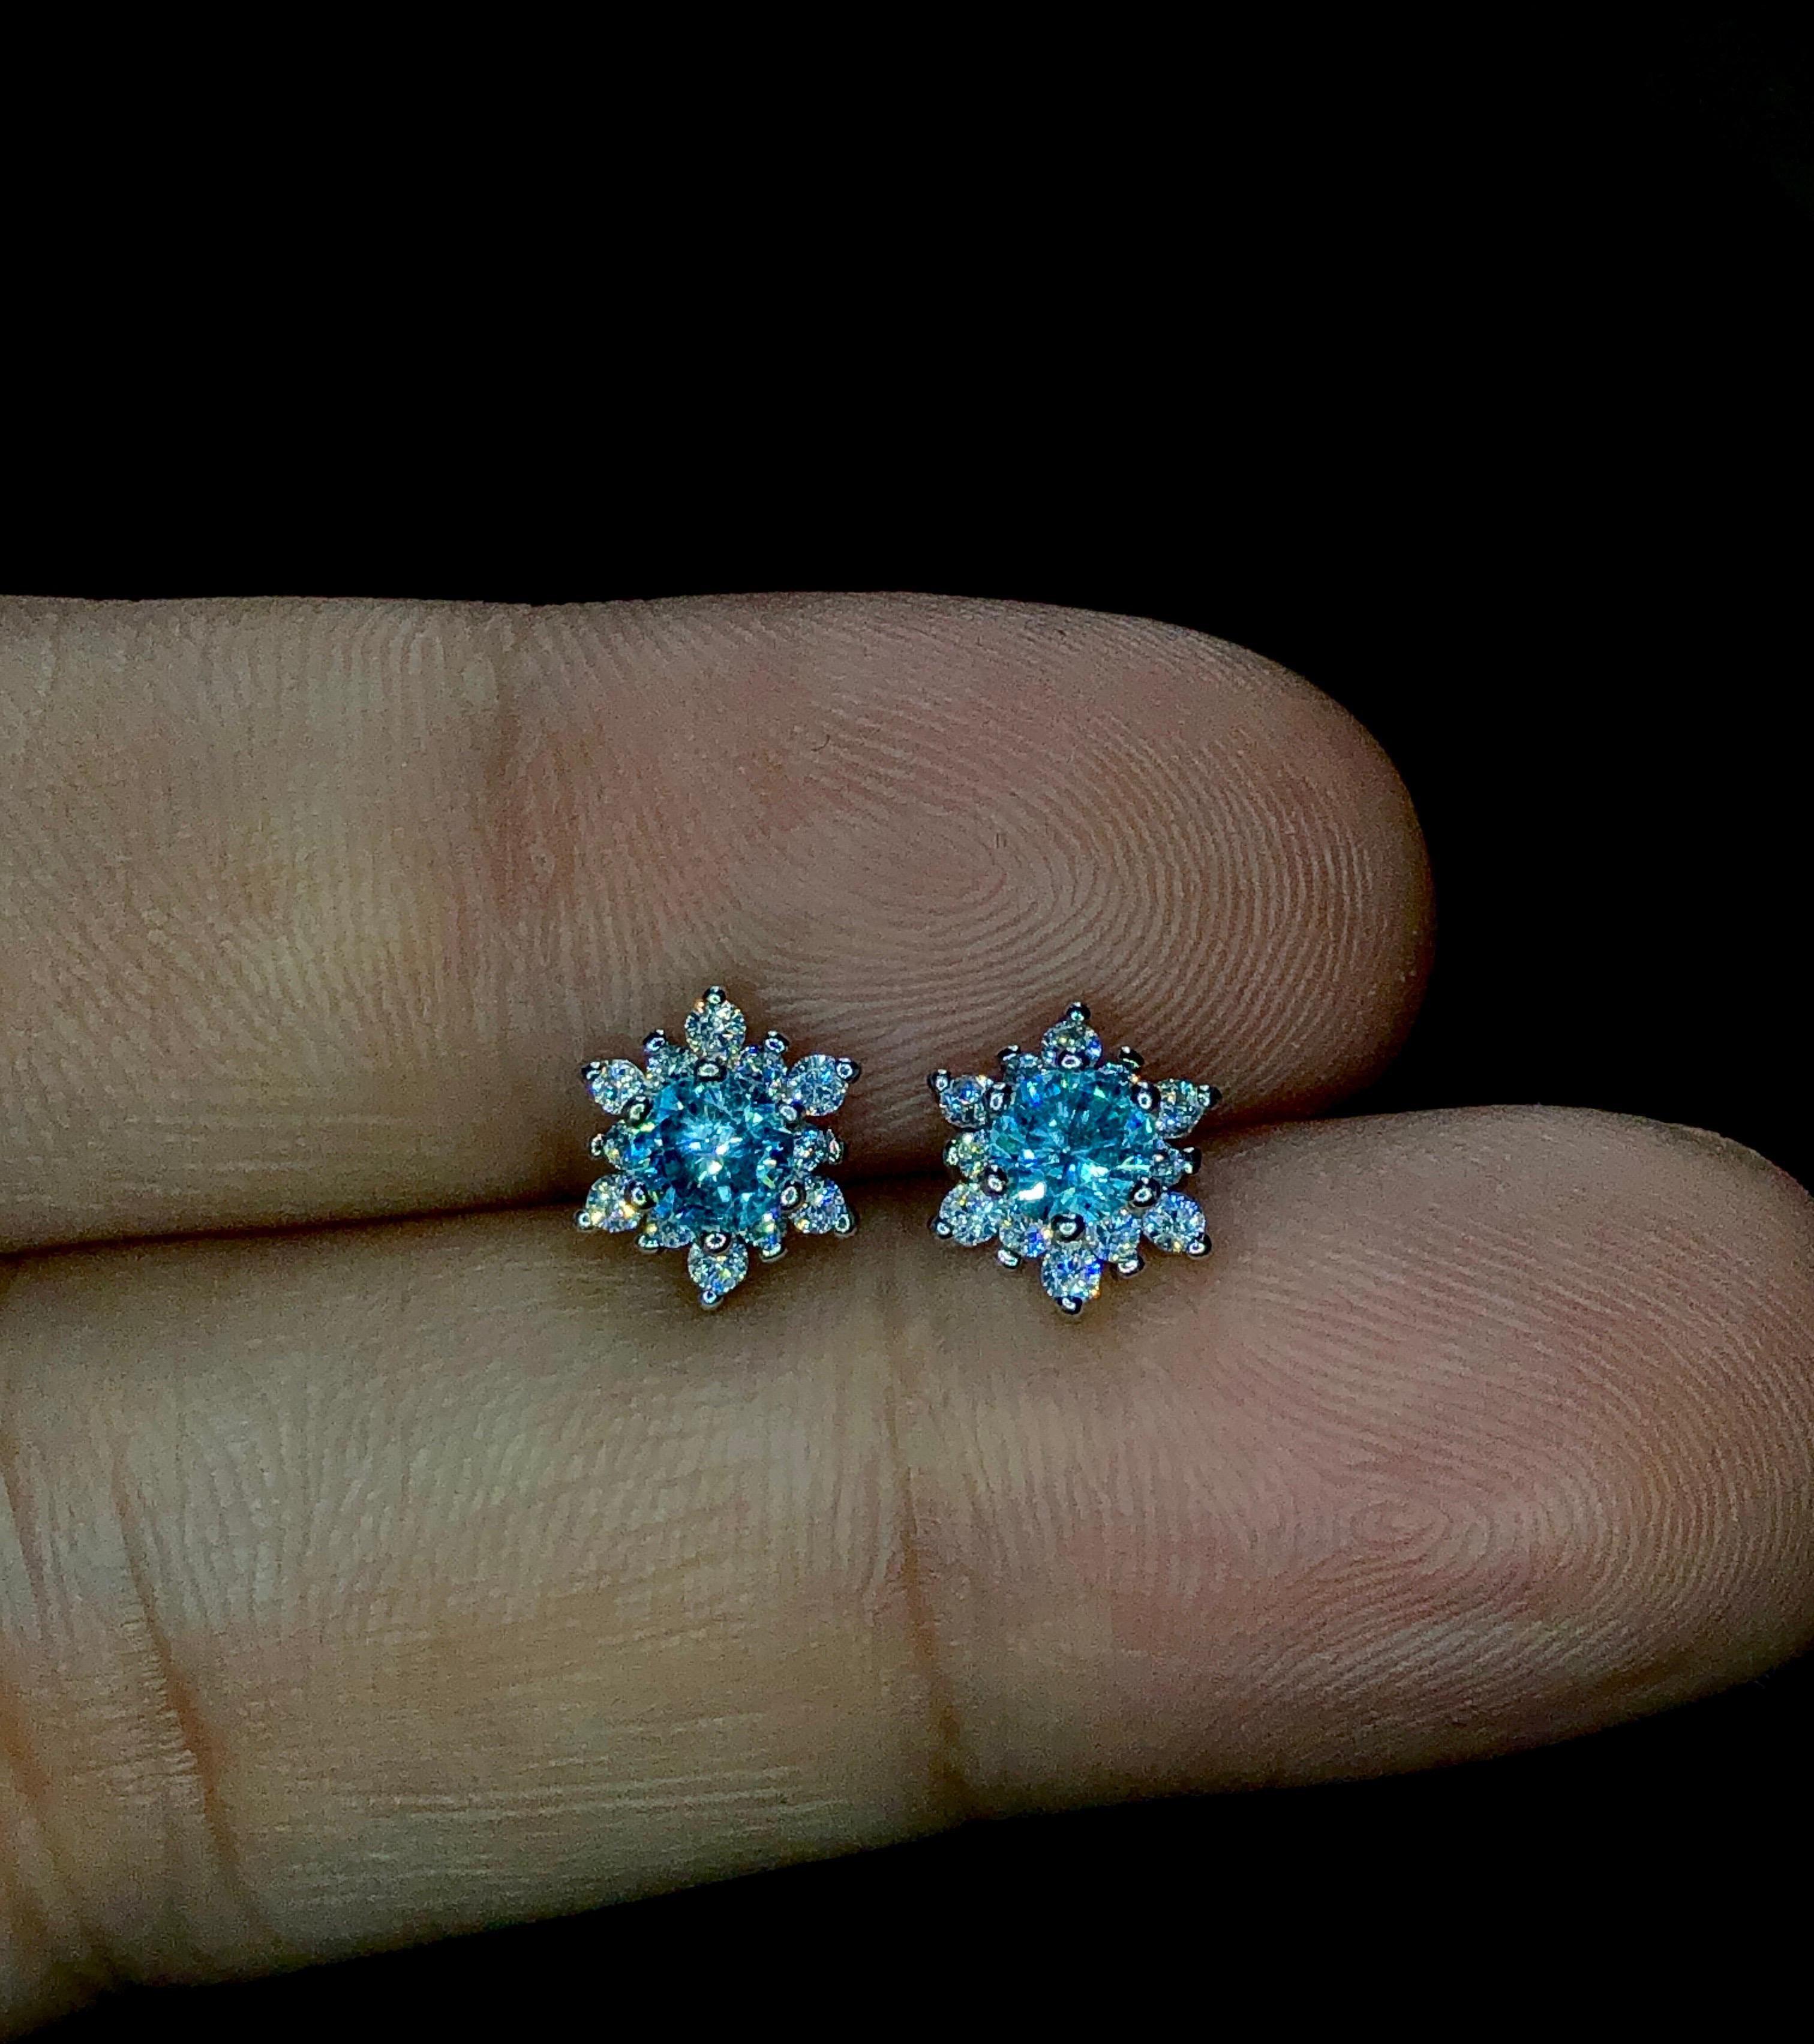 Introducing our stunning Cambodian blue zircon snowflake design earrings, crafted with 925 silver! Elevate your look with elegance and charm. Limited availability, so grab yours now